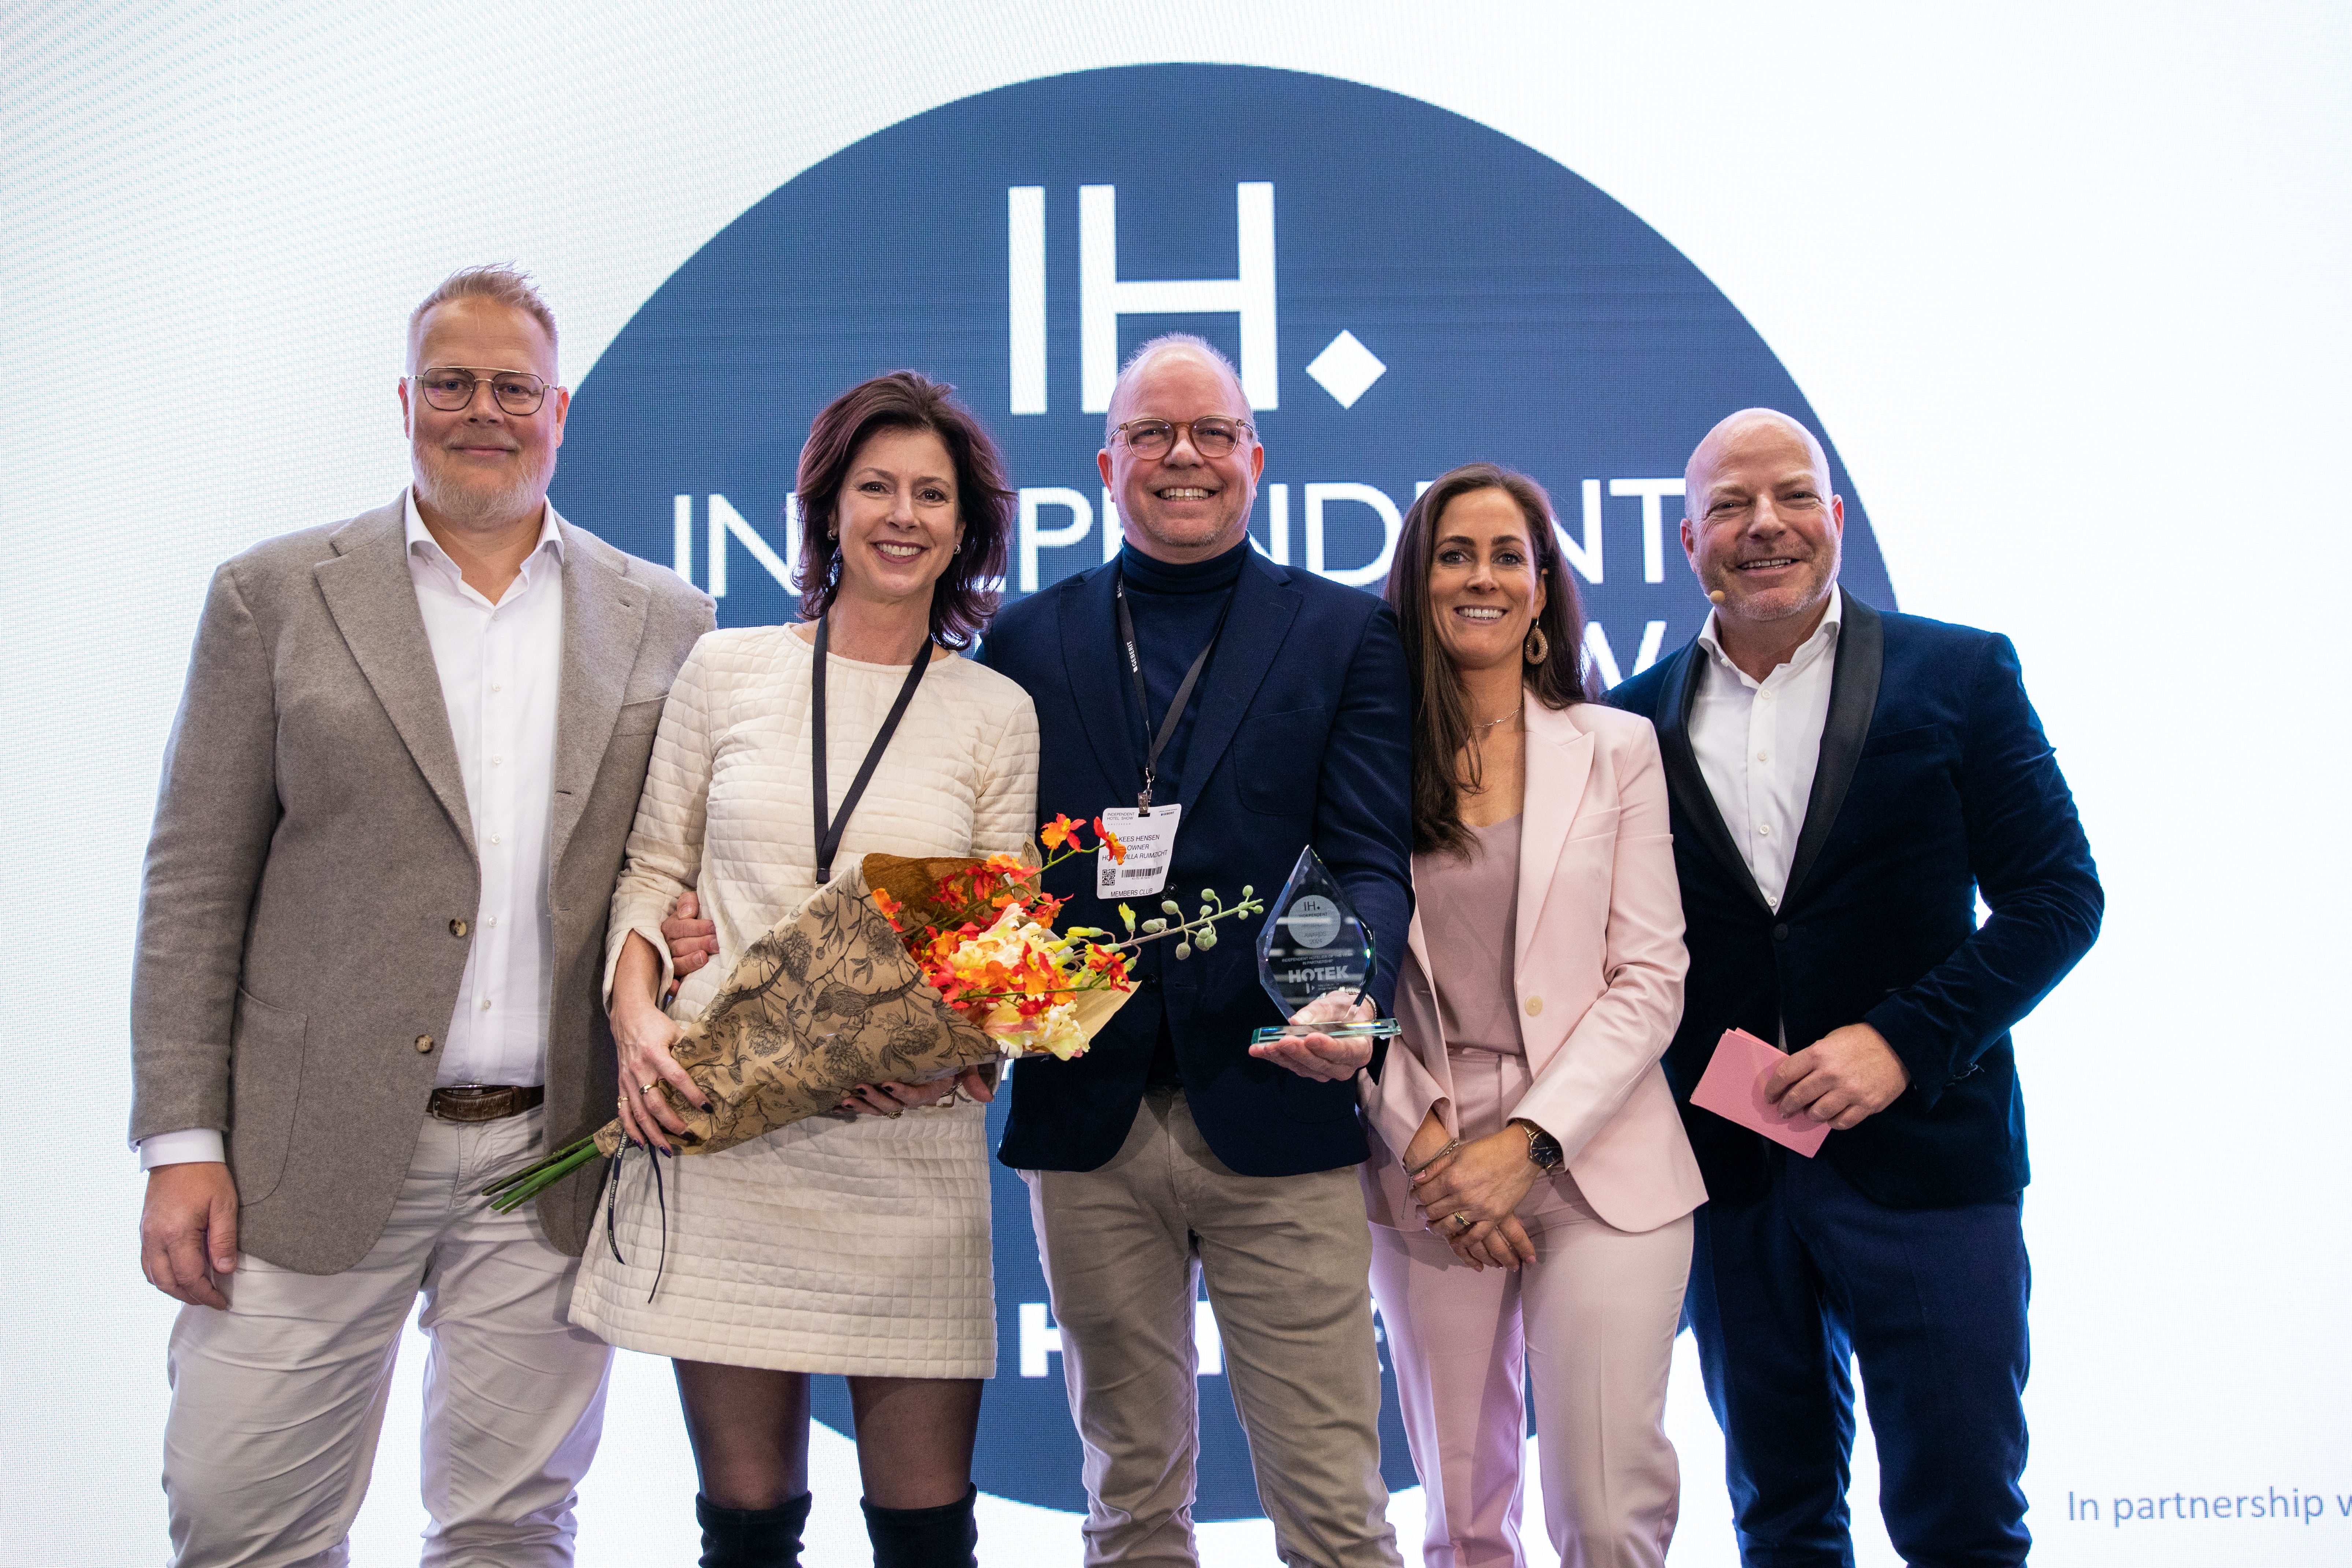 Independent Hoteliers of the Year Mascha Smit & Kees Hensen